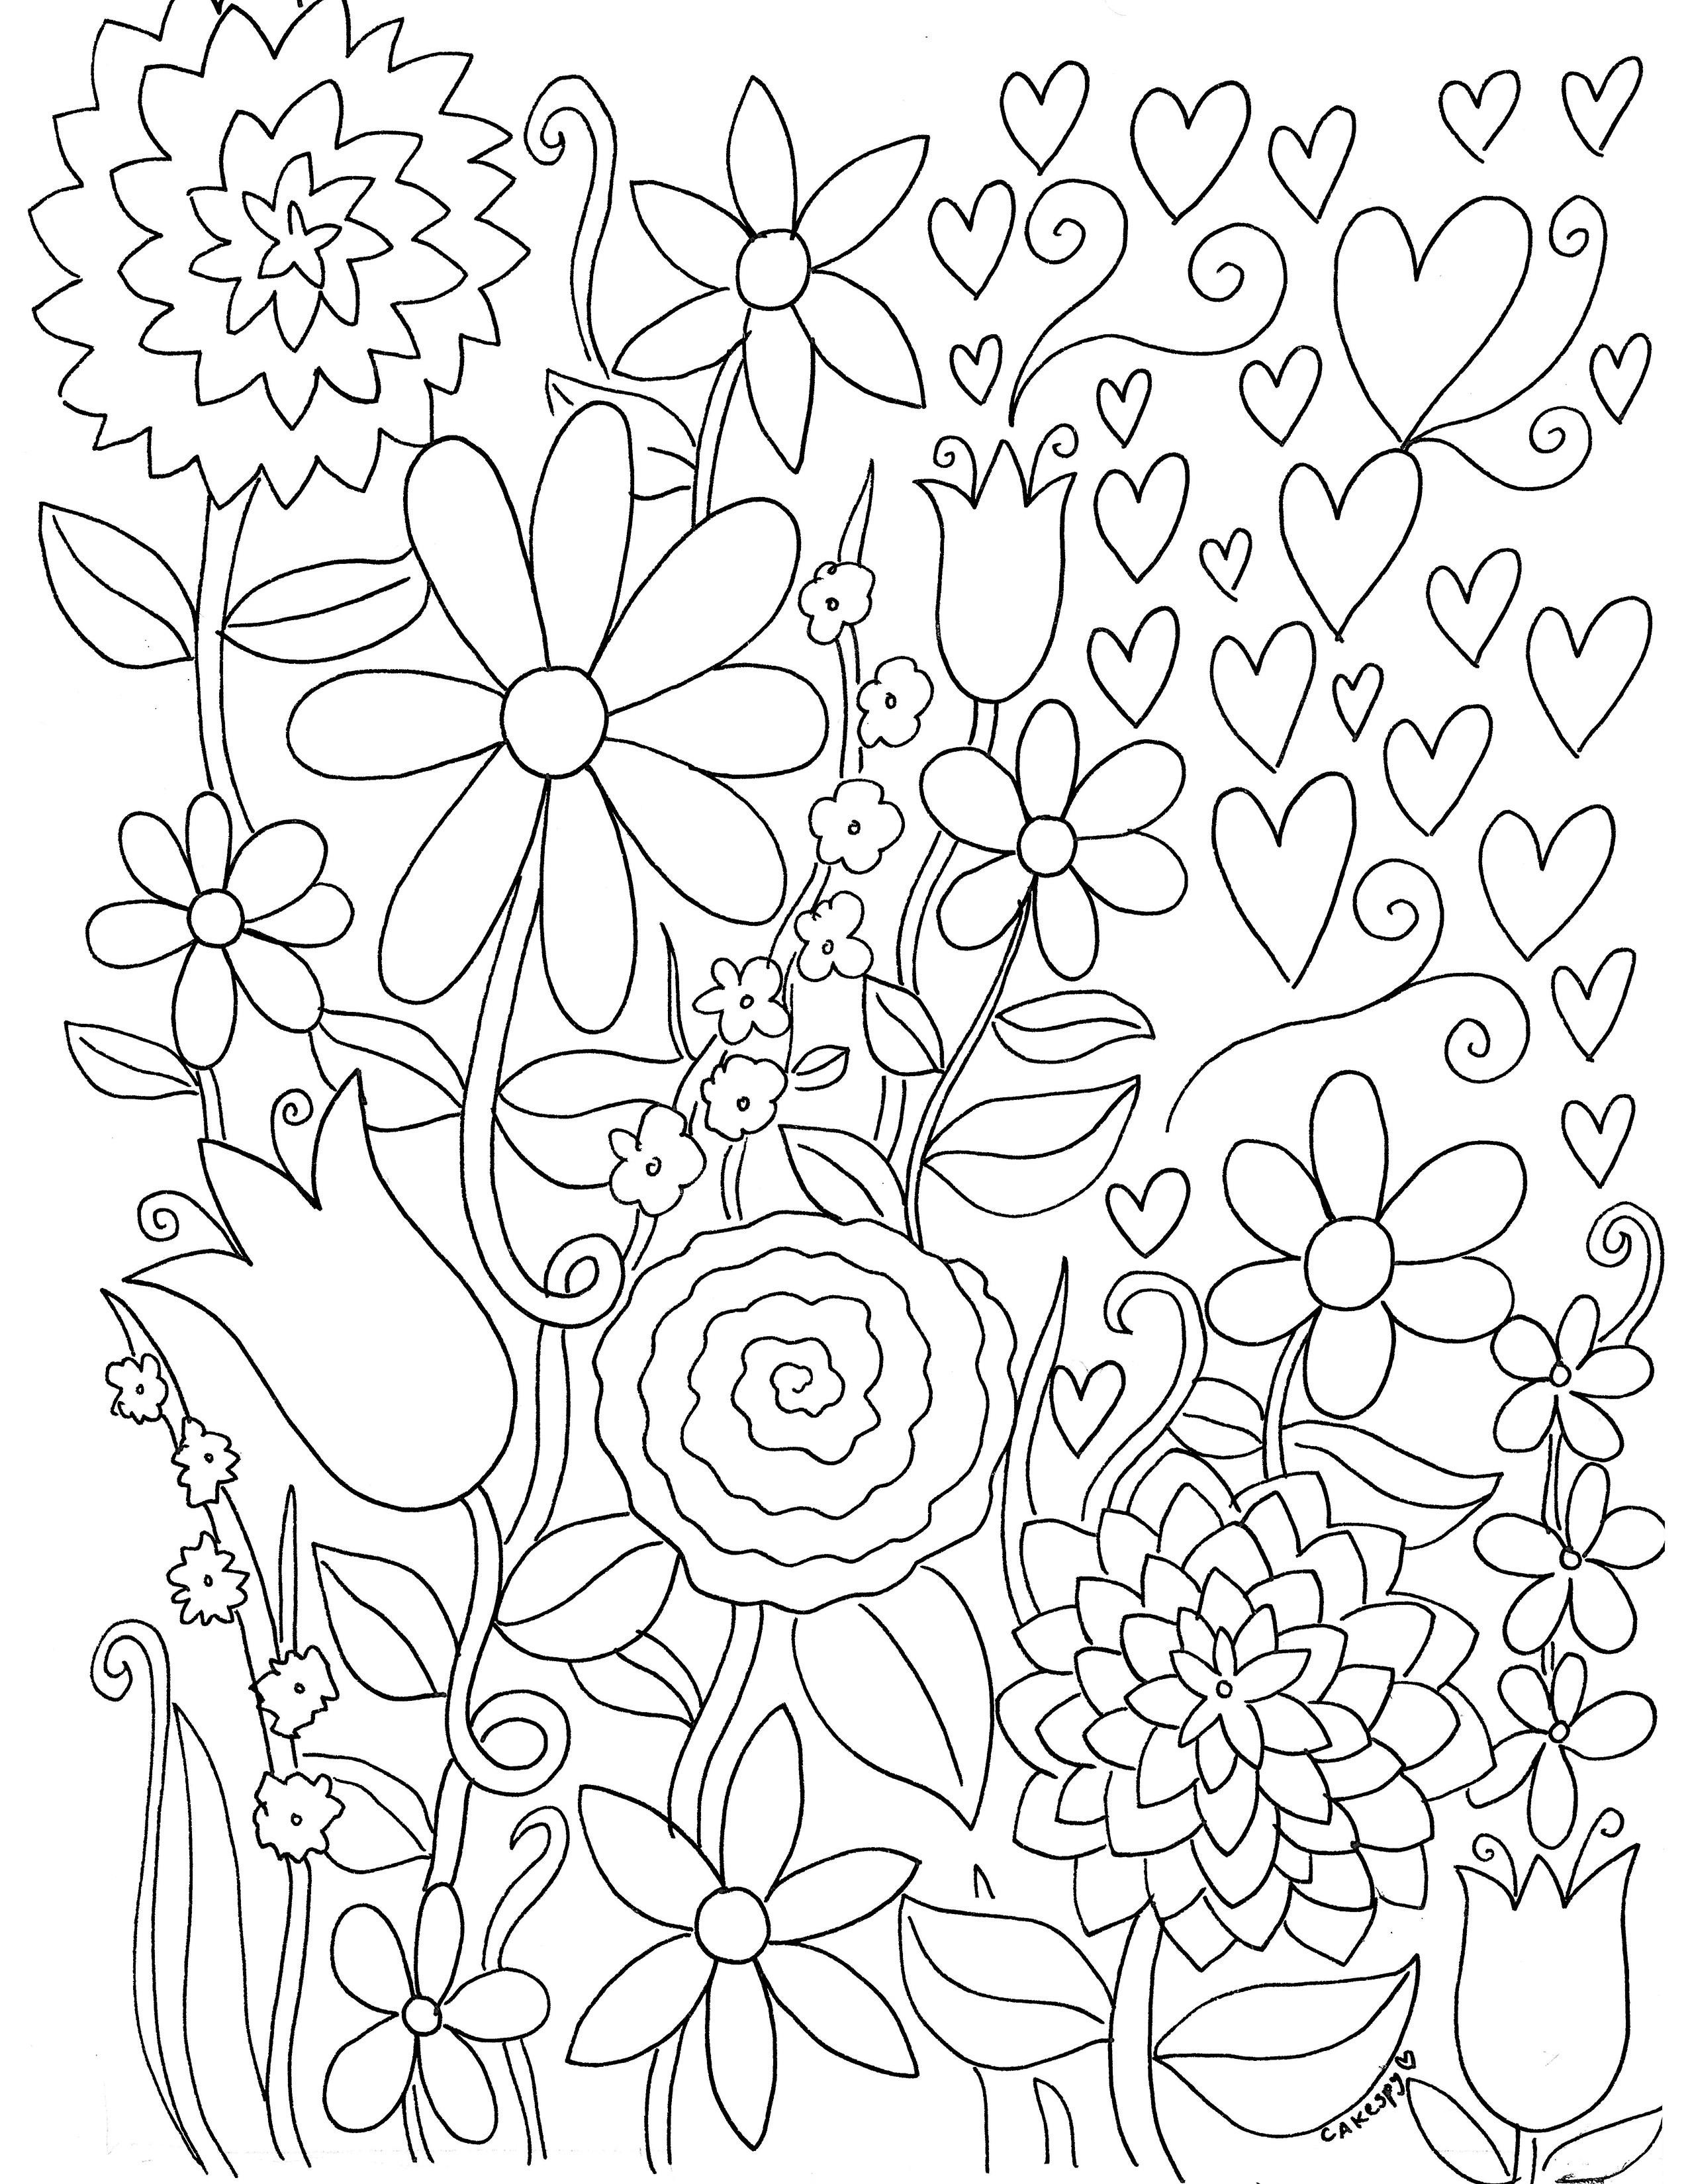 Can You Make Your Own Coloring Pages